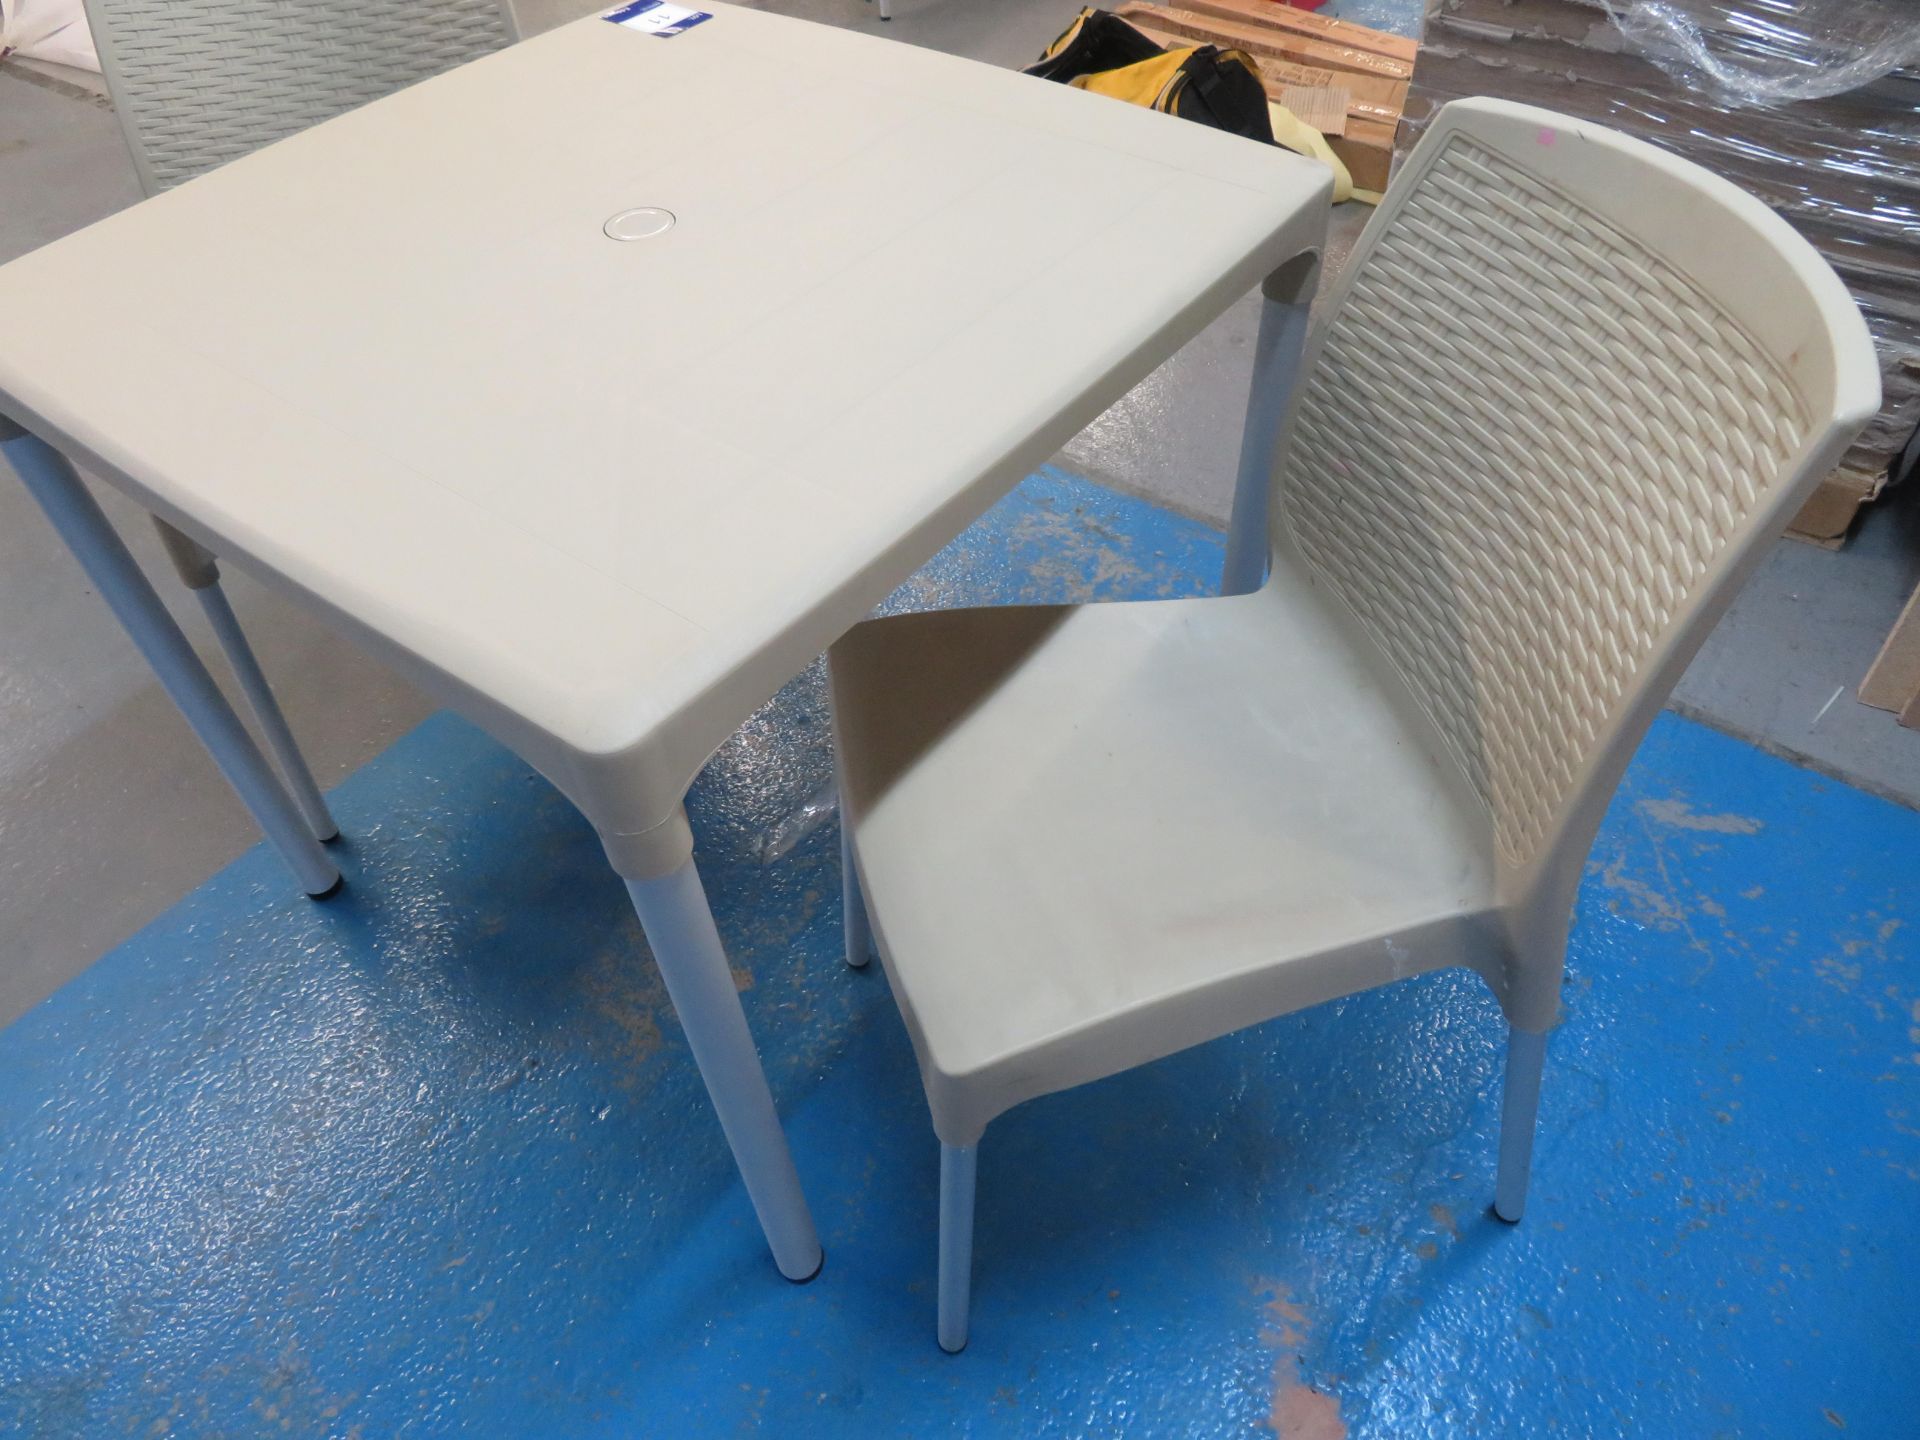 4x 3 piece sets (table plus 2 chairs) 800 x 800mm out door plastic furniture (chairs are used), colo - Image 2 of 3